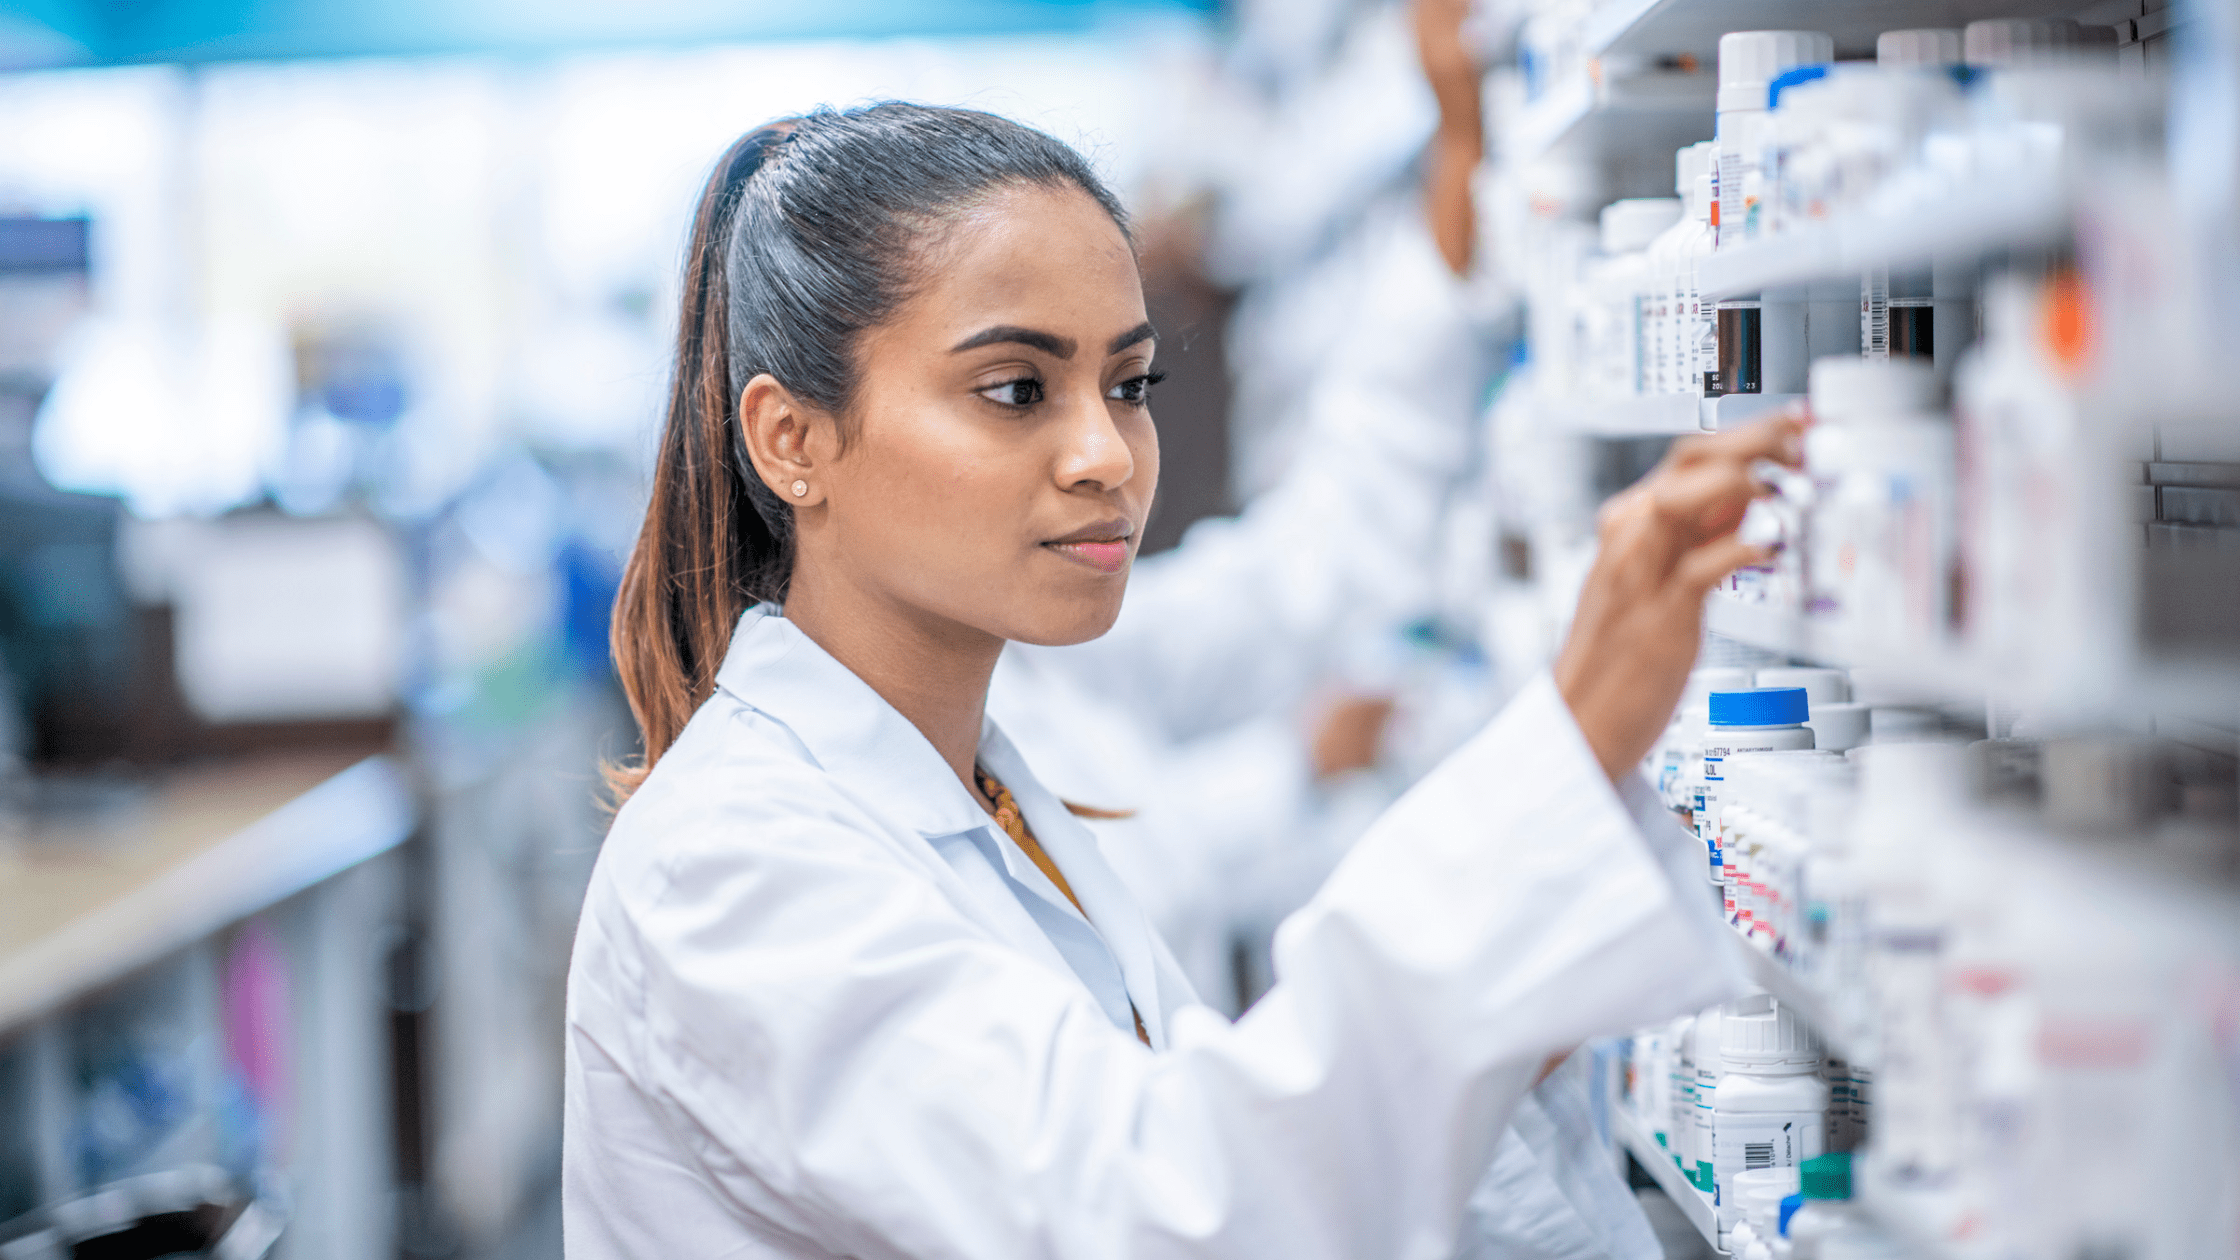 From Intern to Employee: How to Make the Most of Your Pharmacy Internship and Land a Full-Time Job